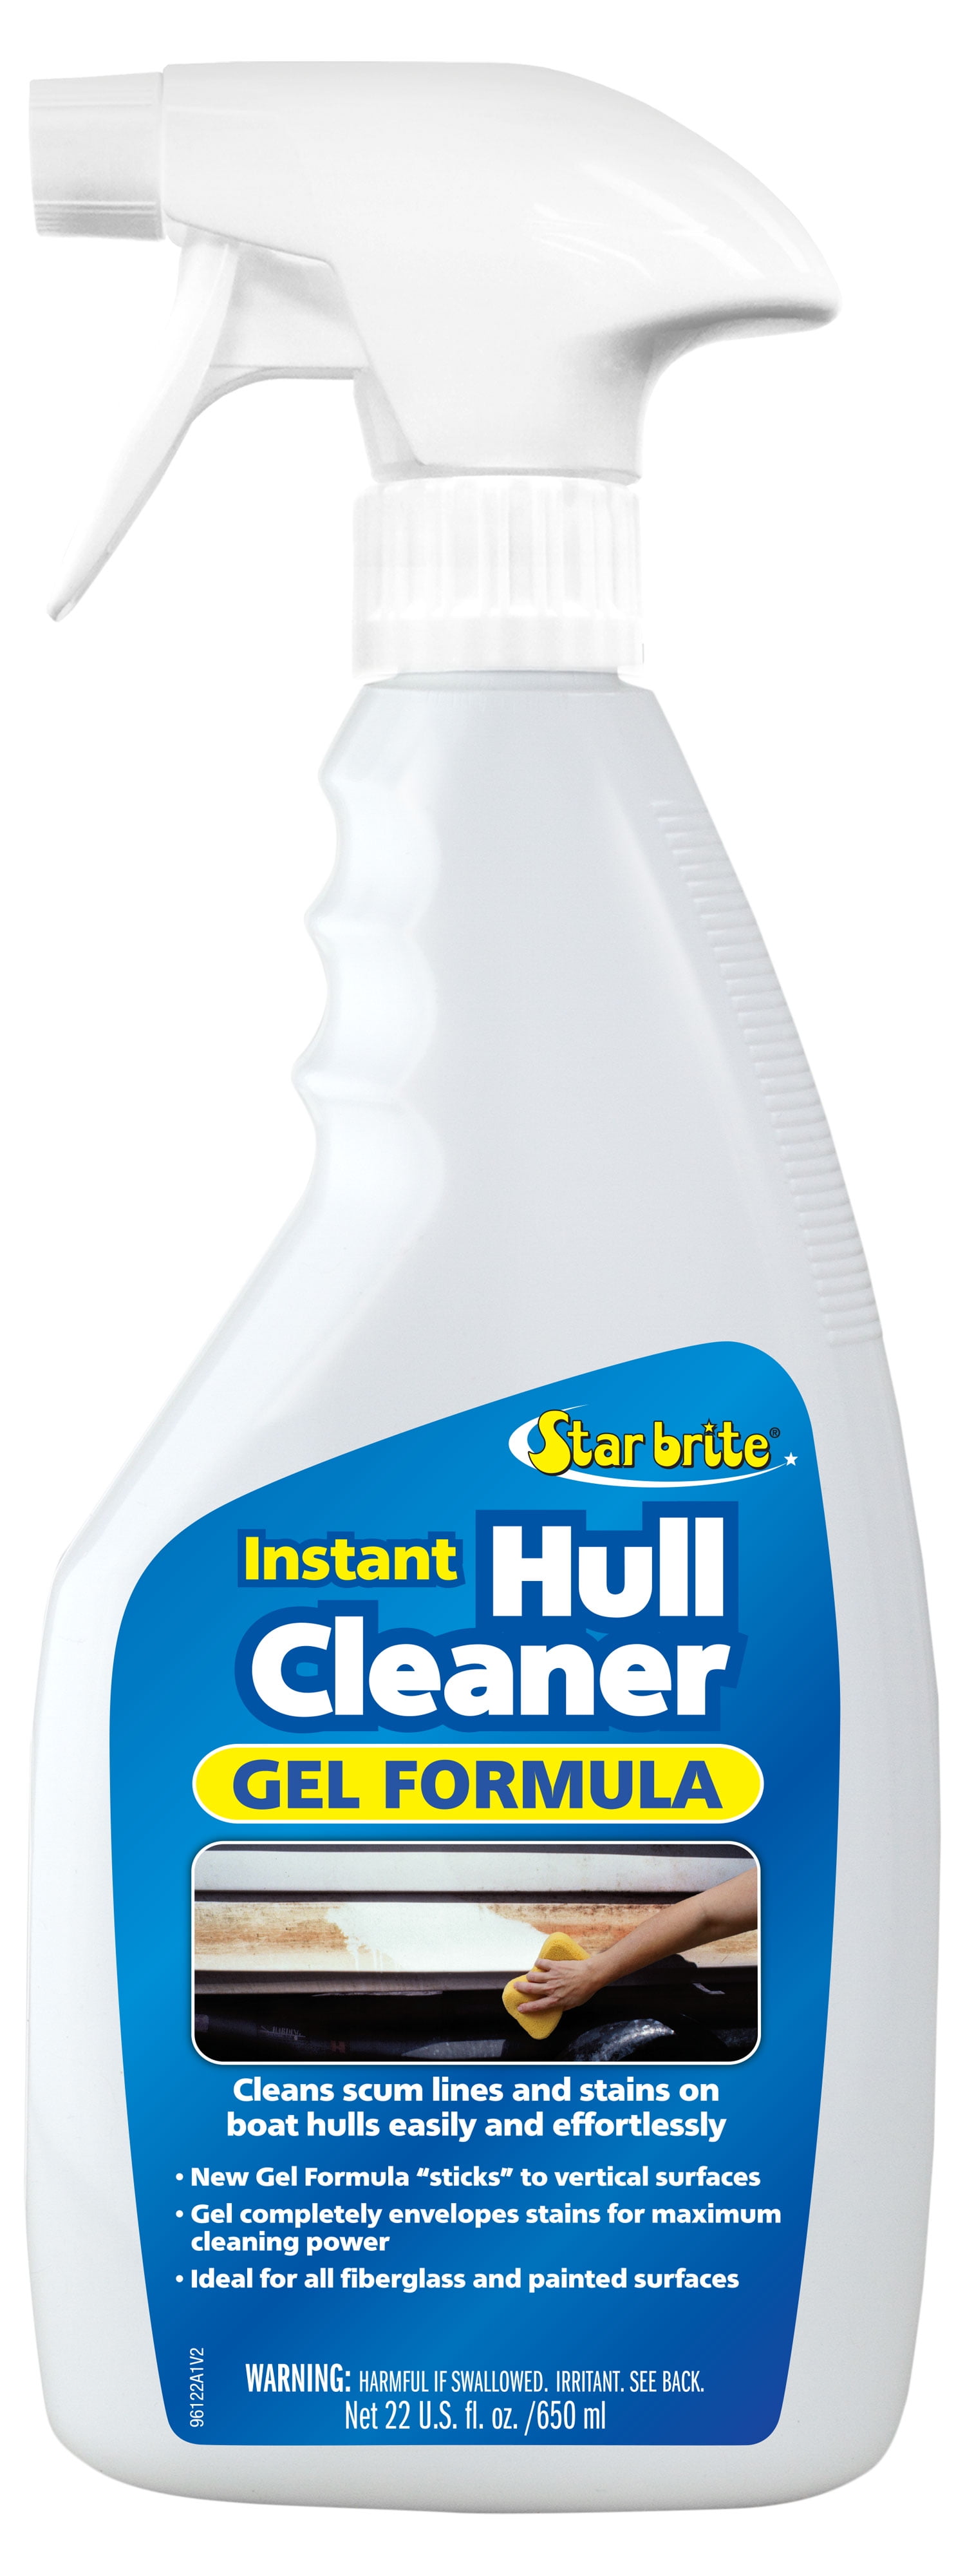 Star Brite Hull Cleaner Gel Spray - 22 oz  For Stains & Scum Lines on Boat Hulls